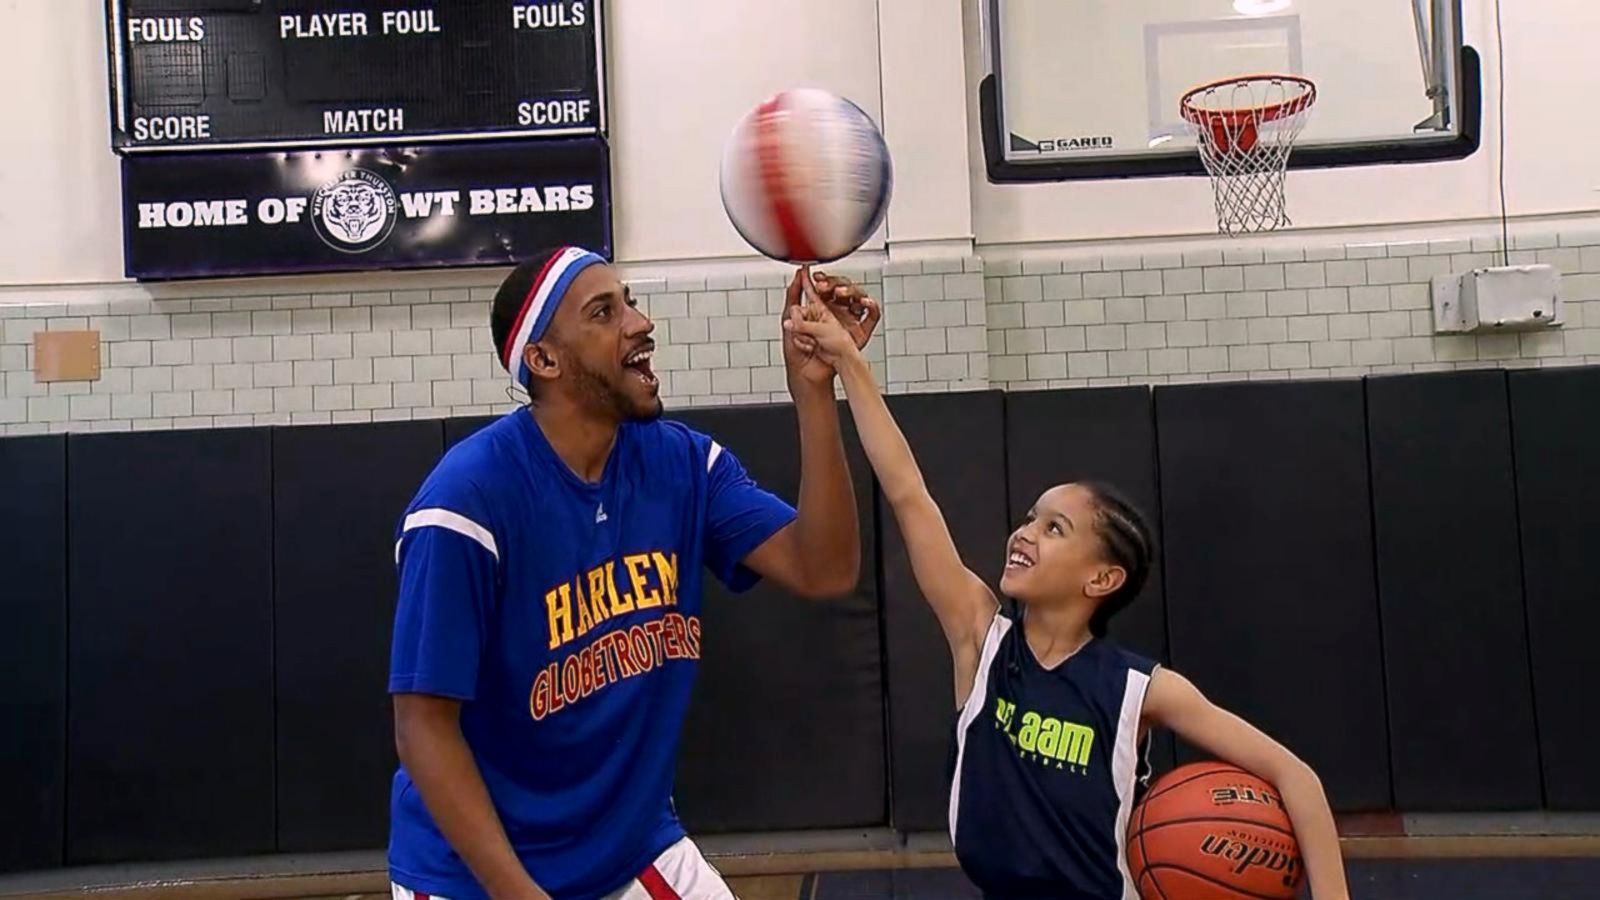 HARLEM GLOBETROTTERS RETURN TO THE COURT WITH UNPRECEDENTED